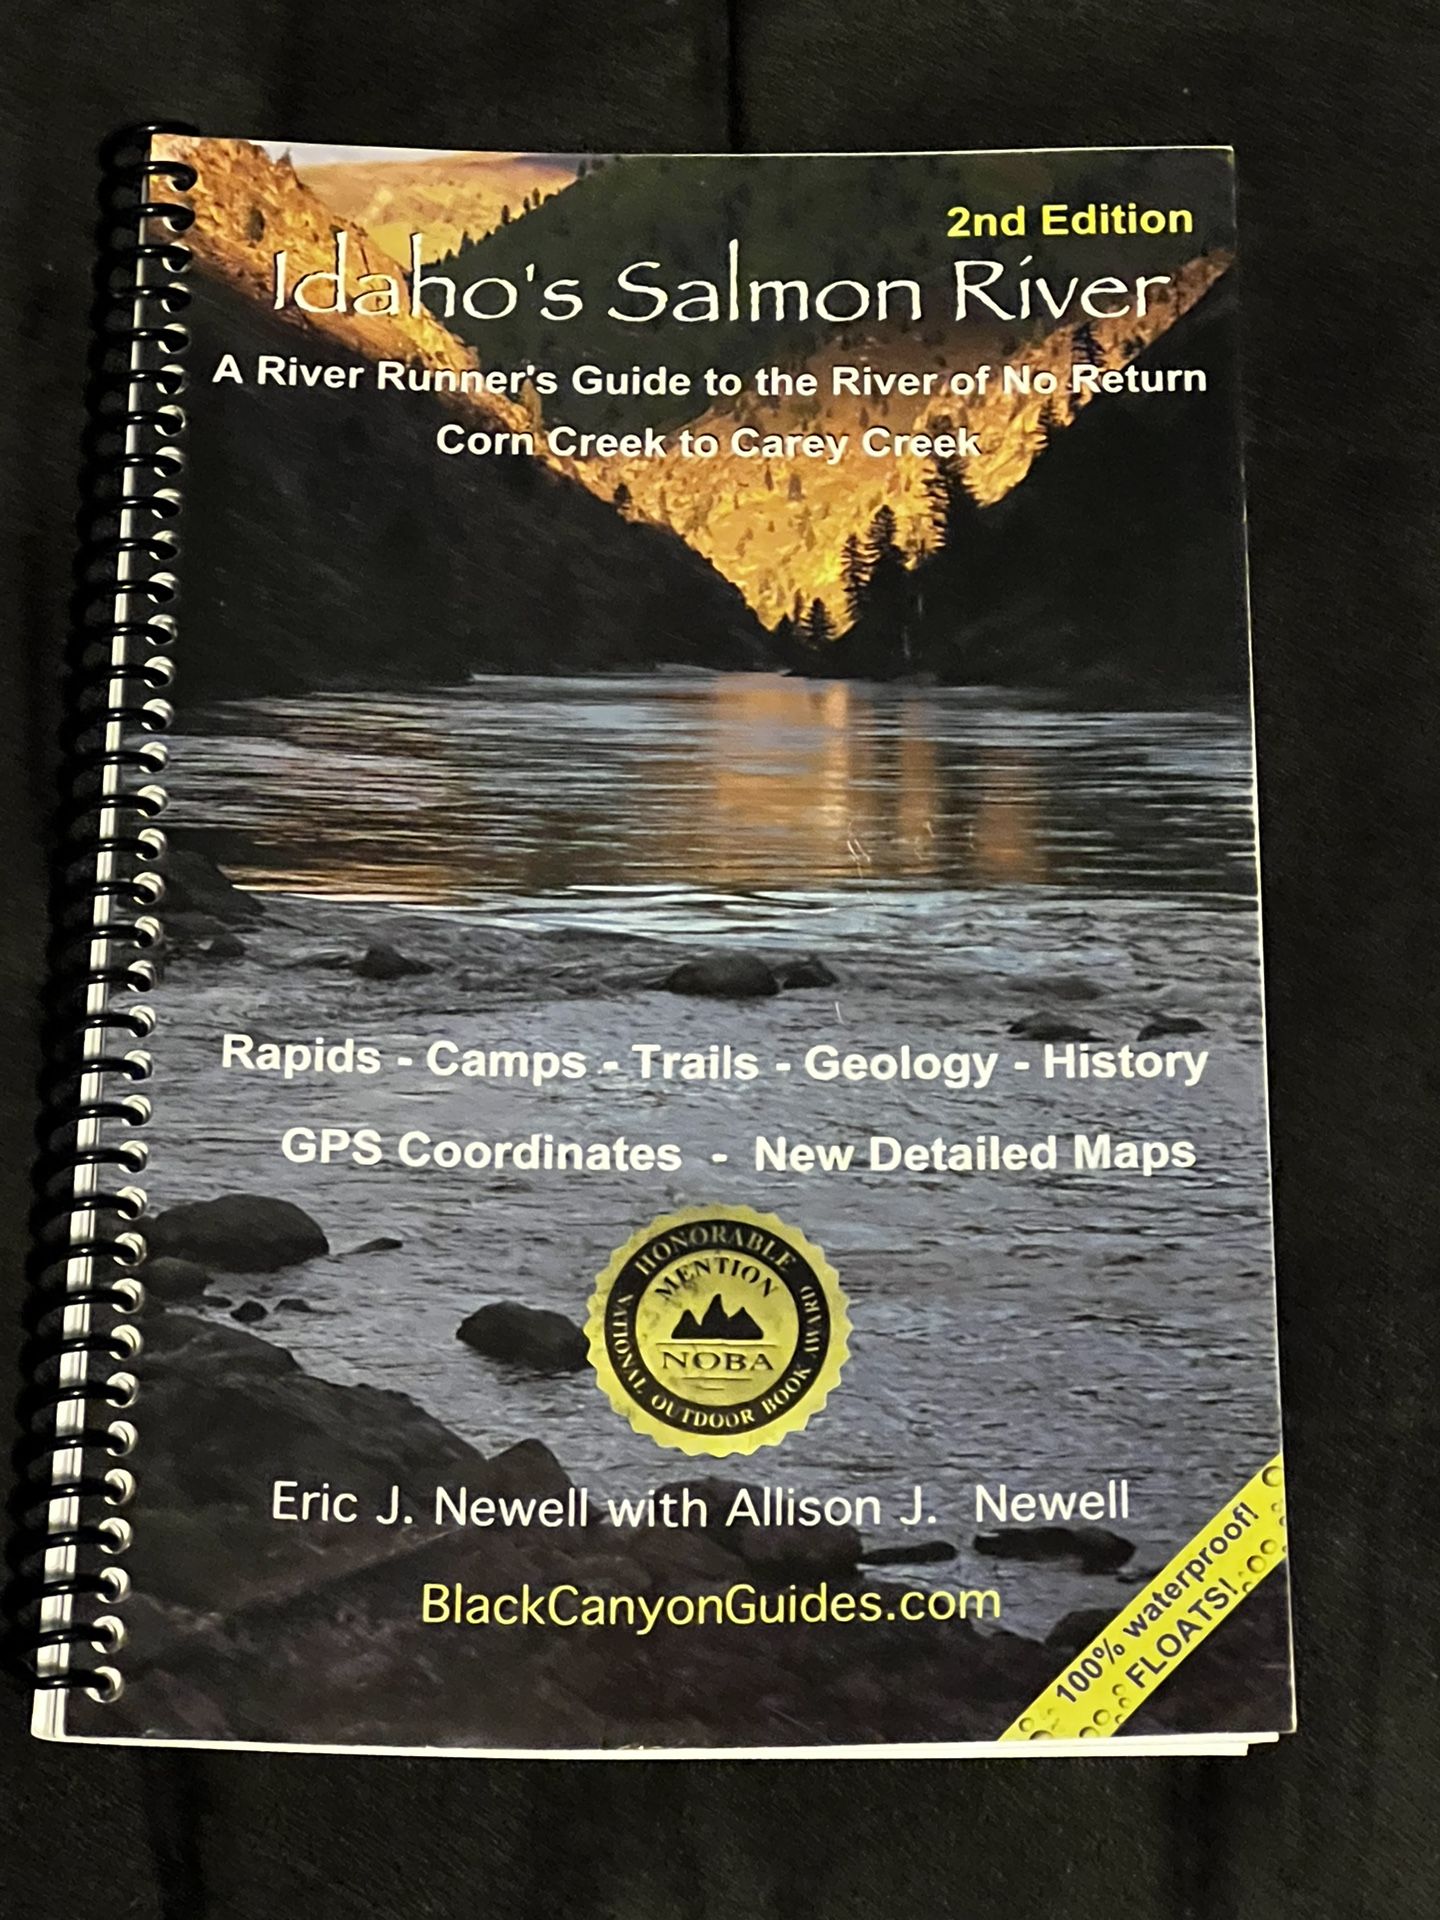 Idaho’s Salmon River 2nd Edition - Waterproof Floating River book